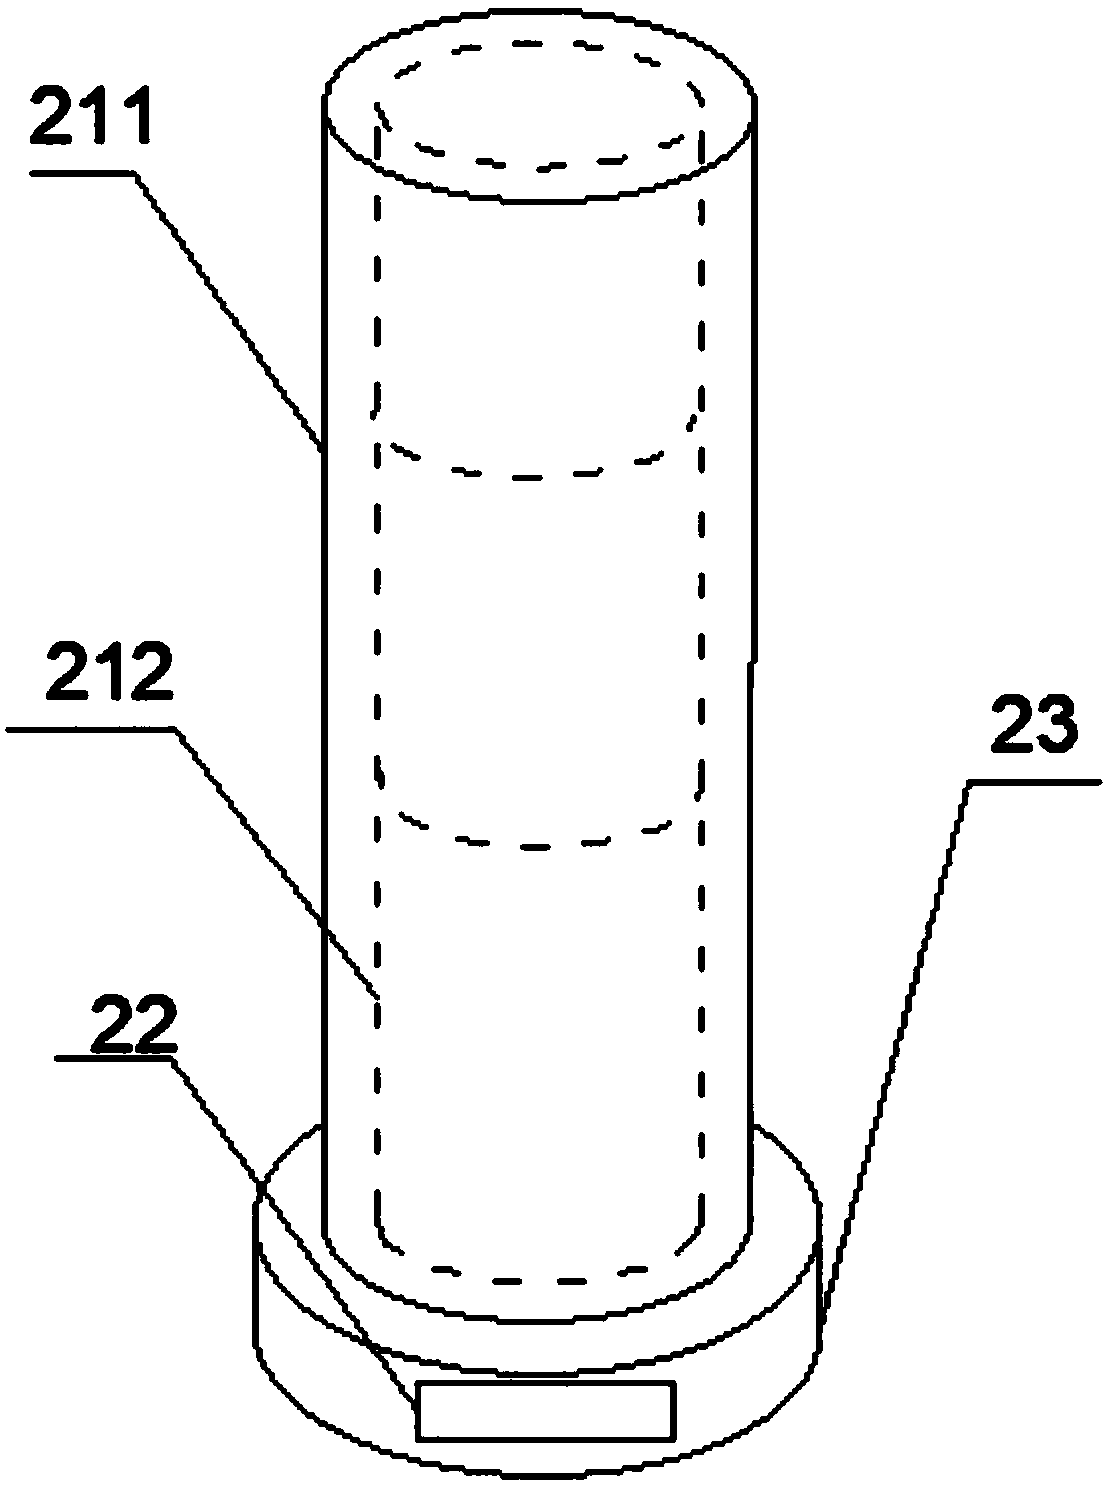 Magnetic shielding system for electron beam welding